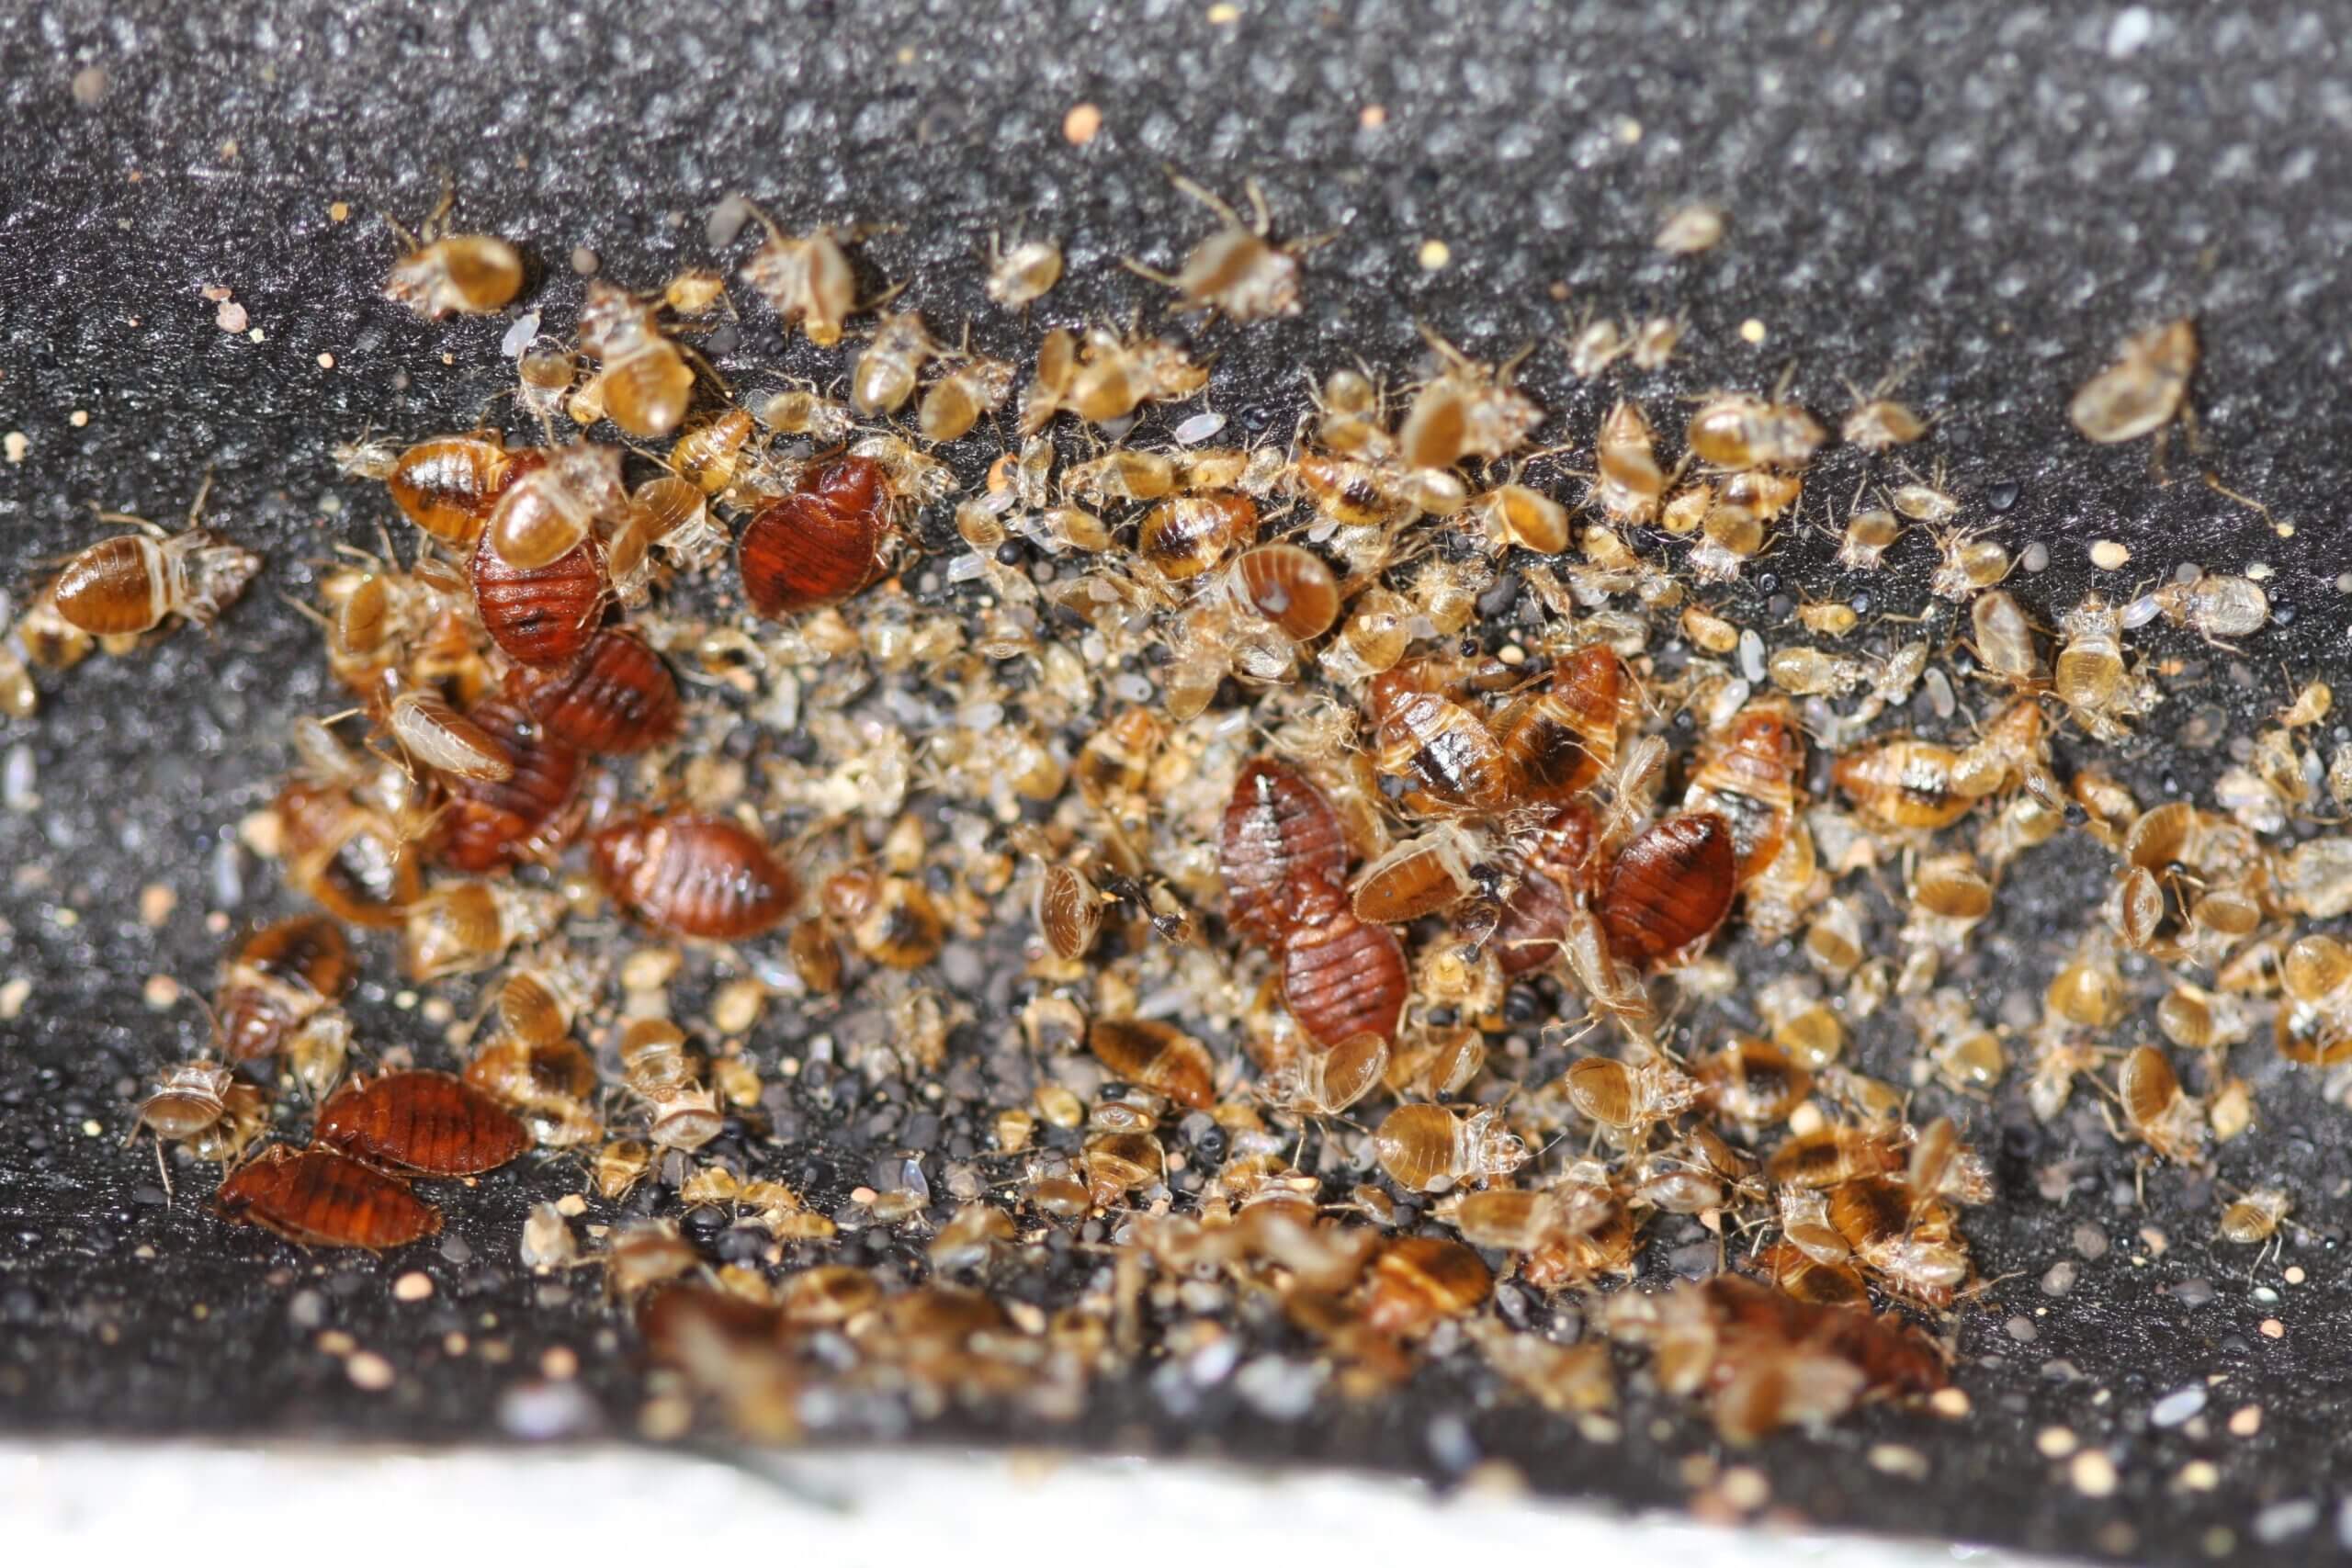 How to Check for Bed Bugs in a Hotel - Cryonite.com